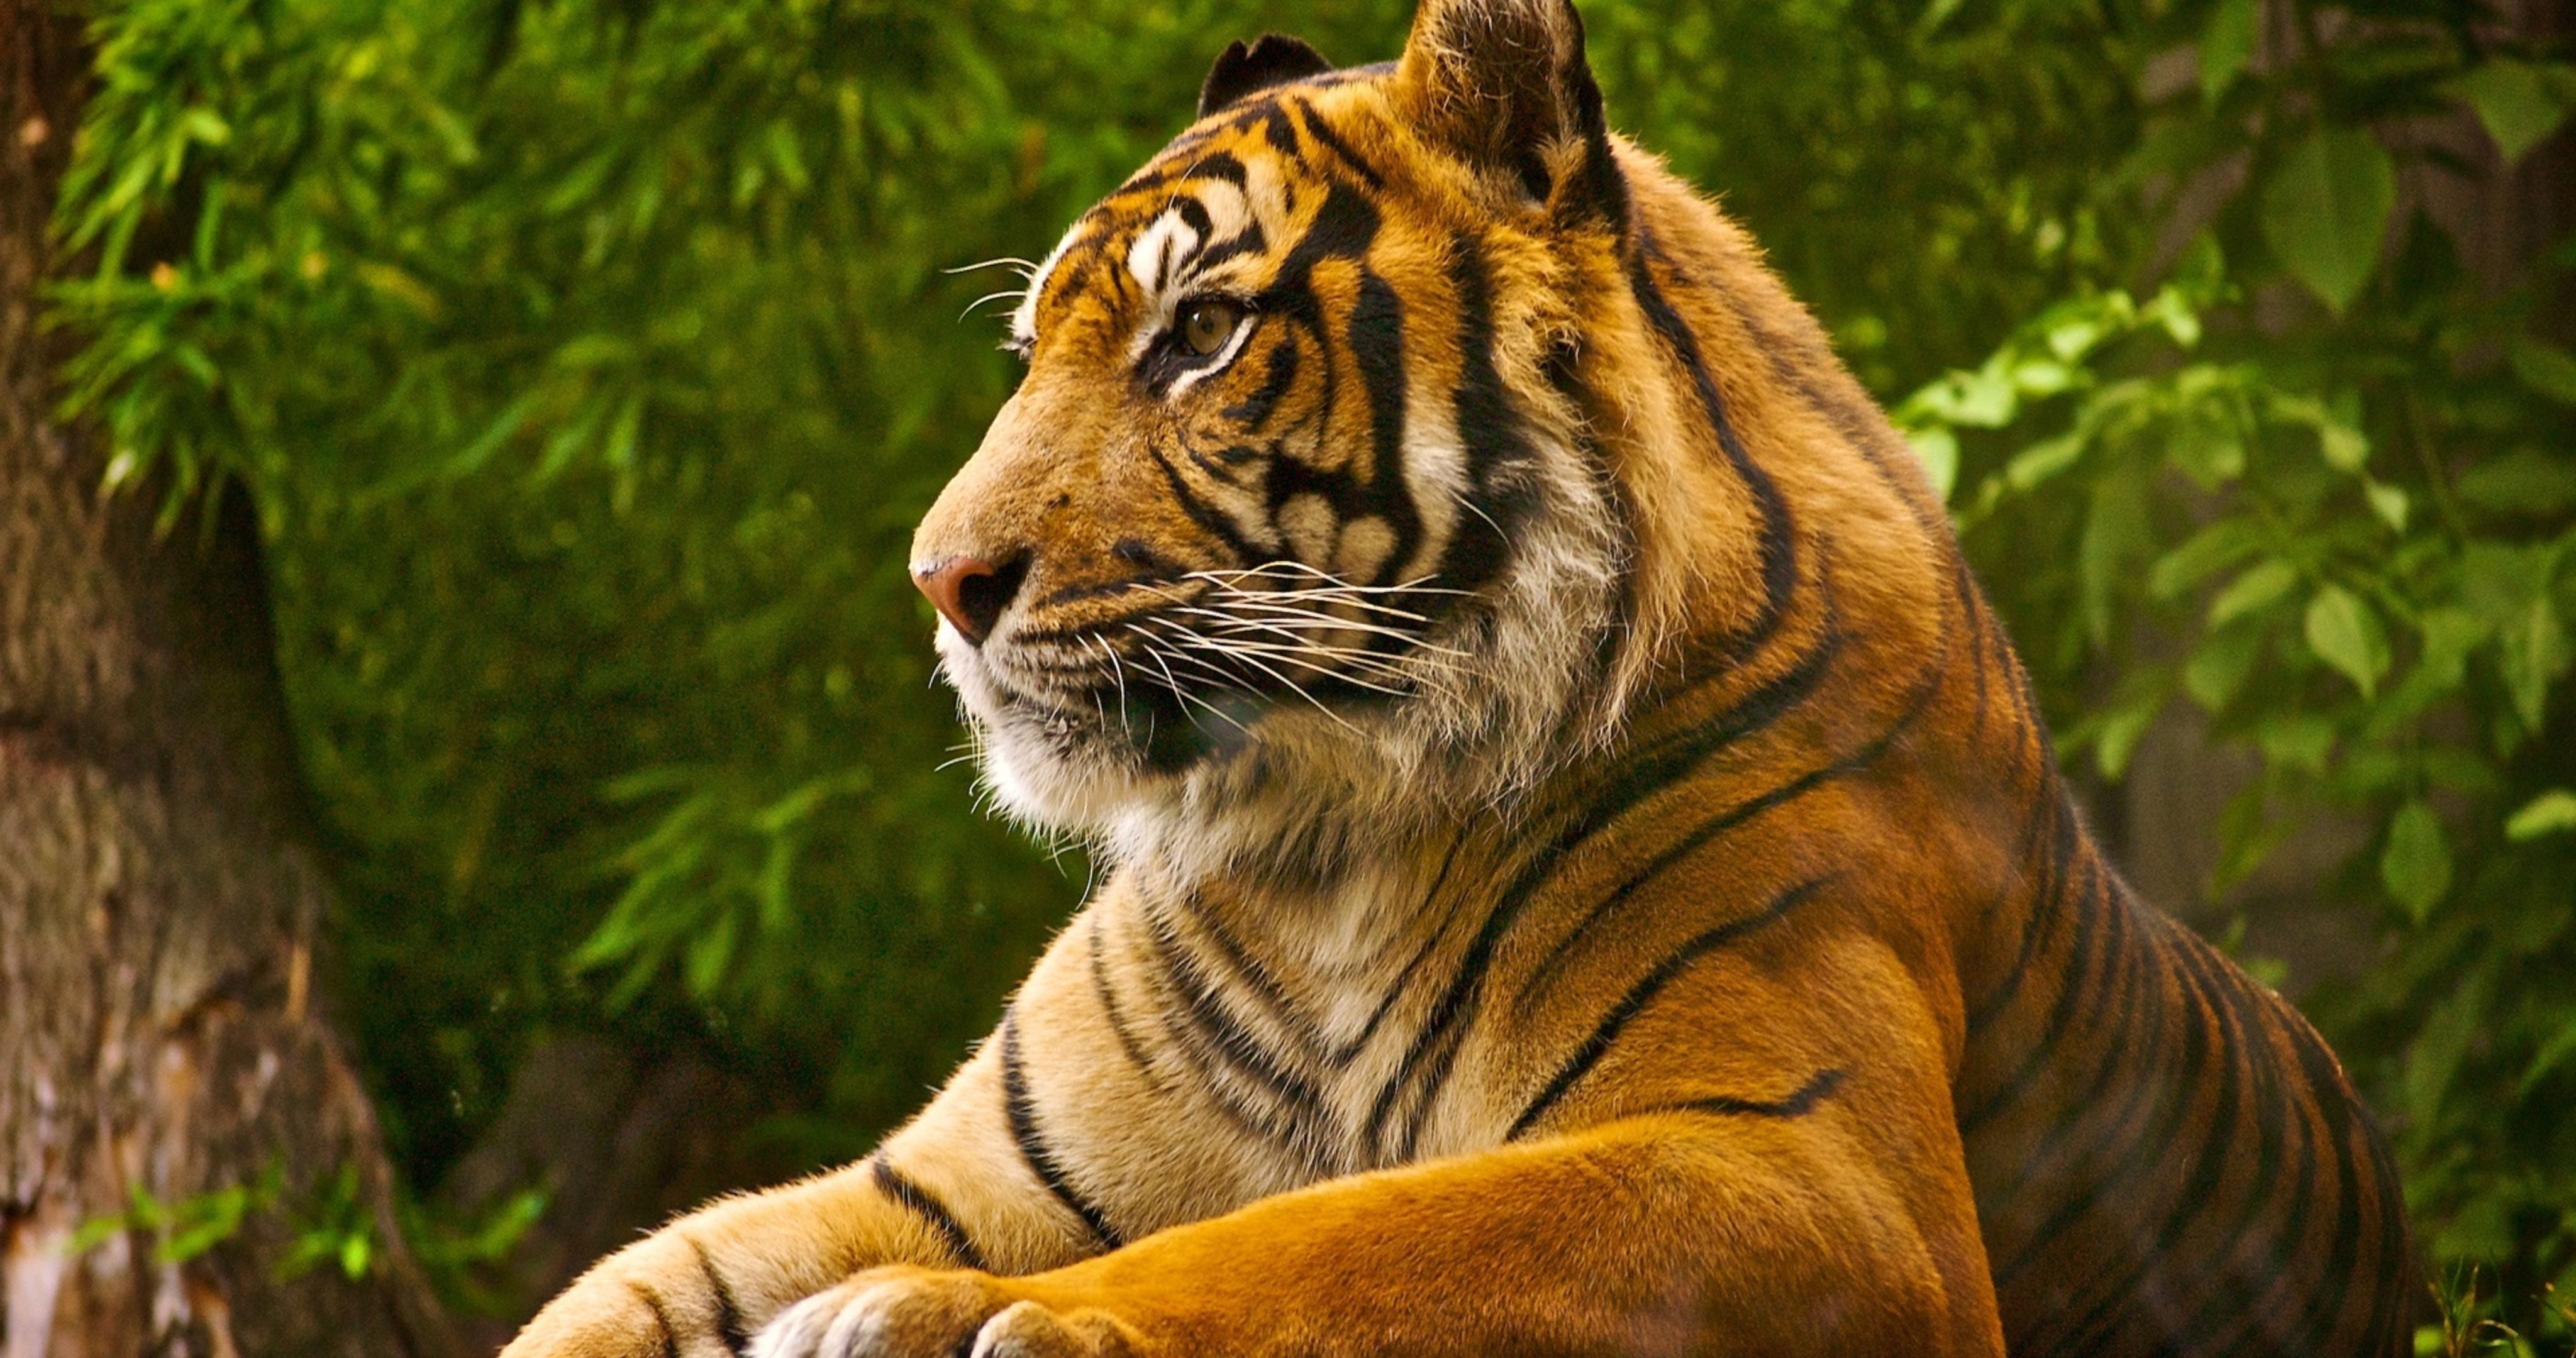 tiger trees animals wild cat photography Wallpaper